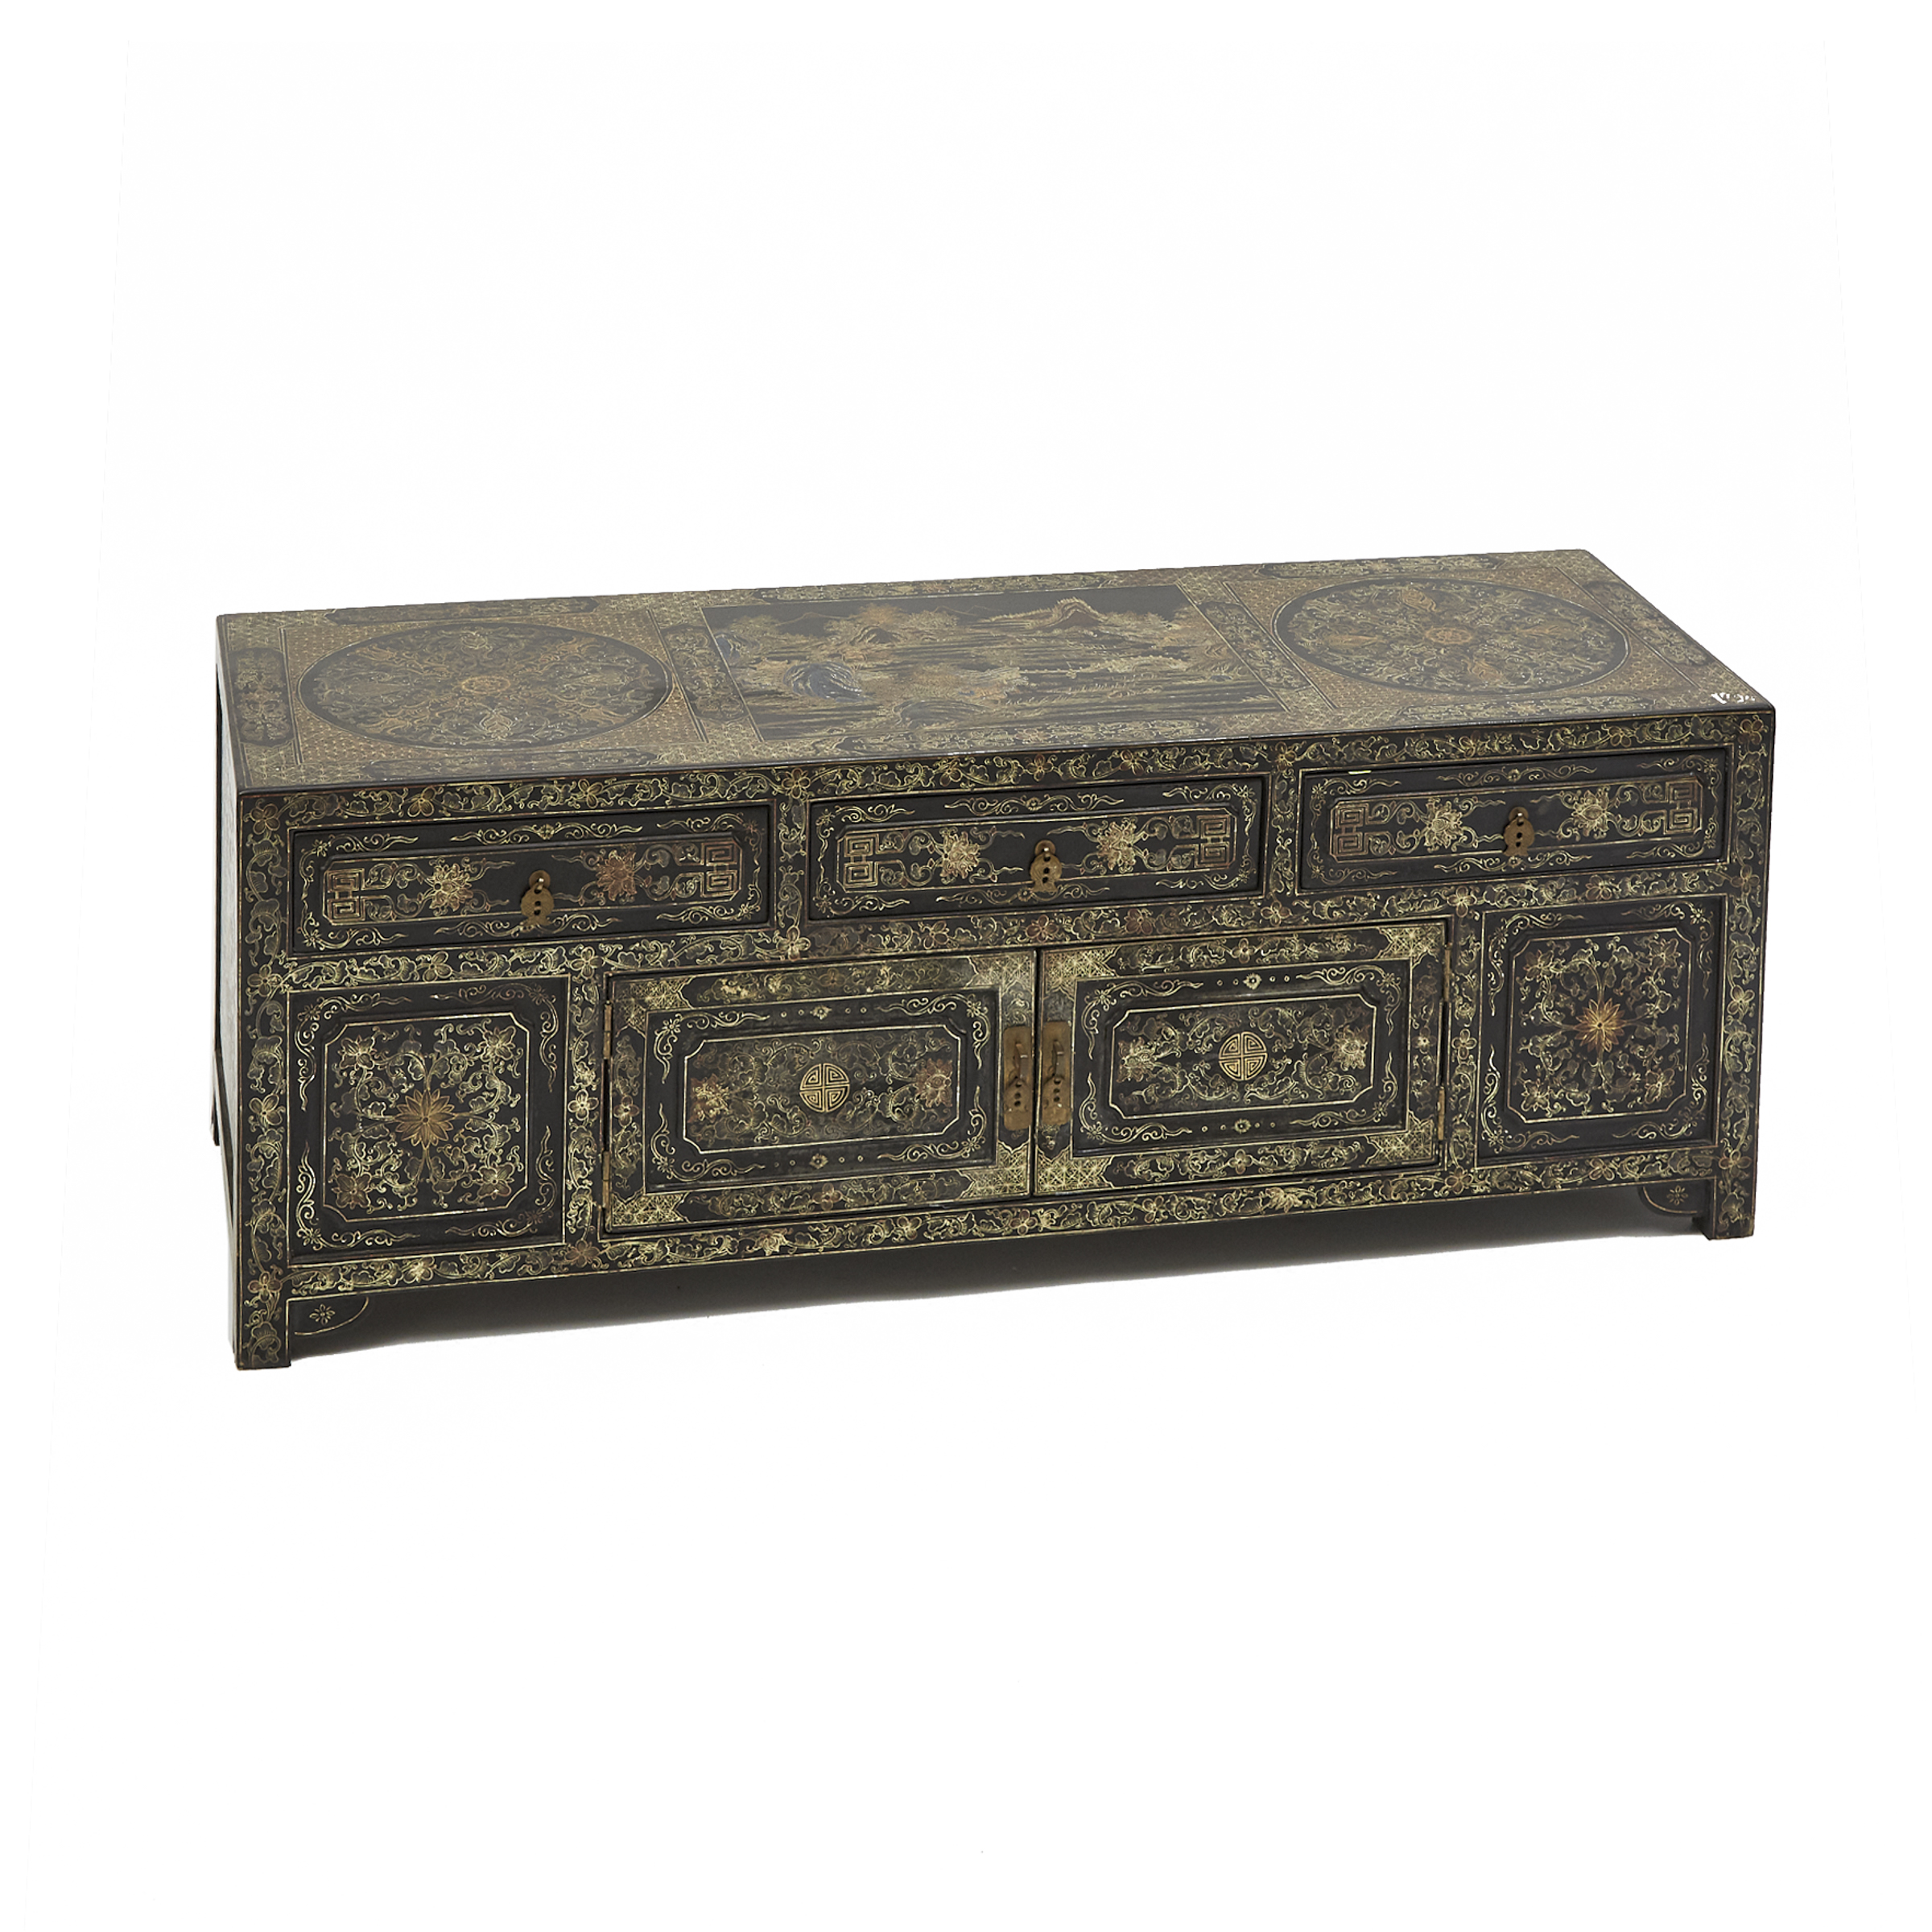 A Chinese Gilt Decorated Black Lacquer Cabinet, 19th Century